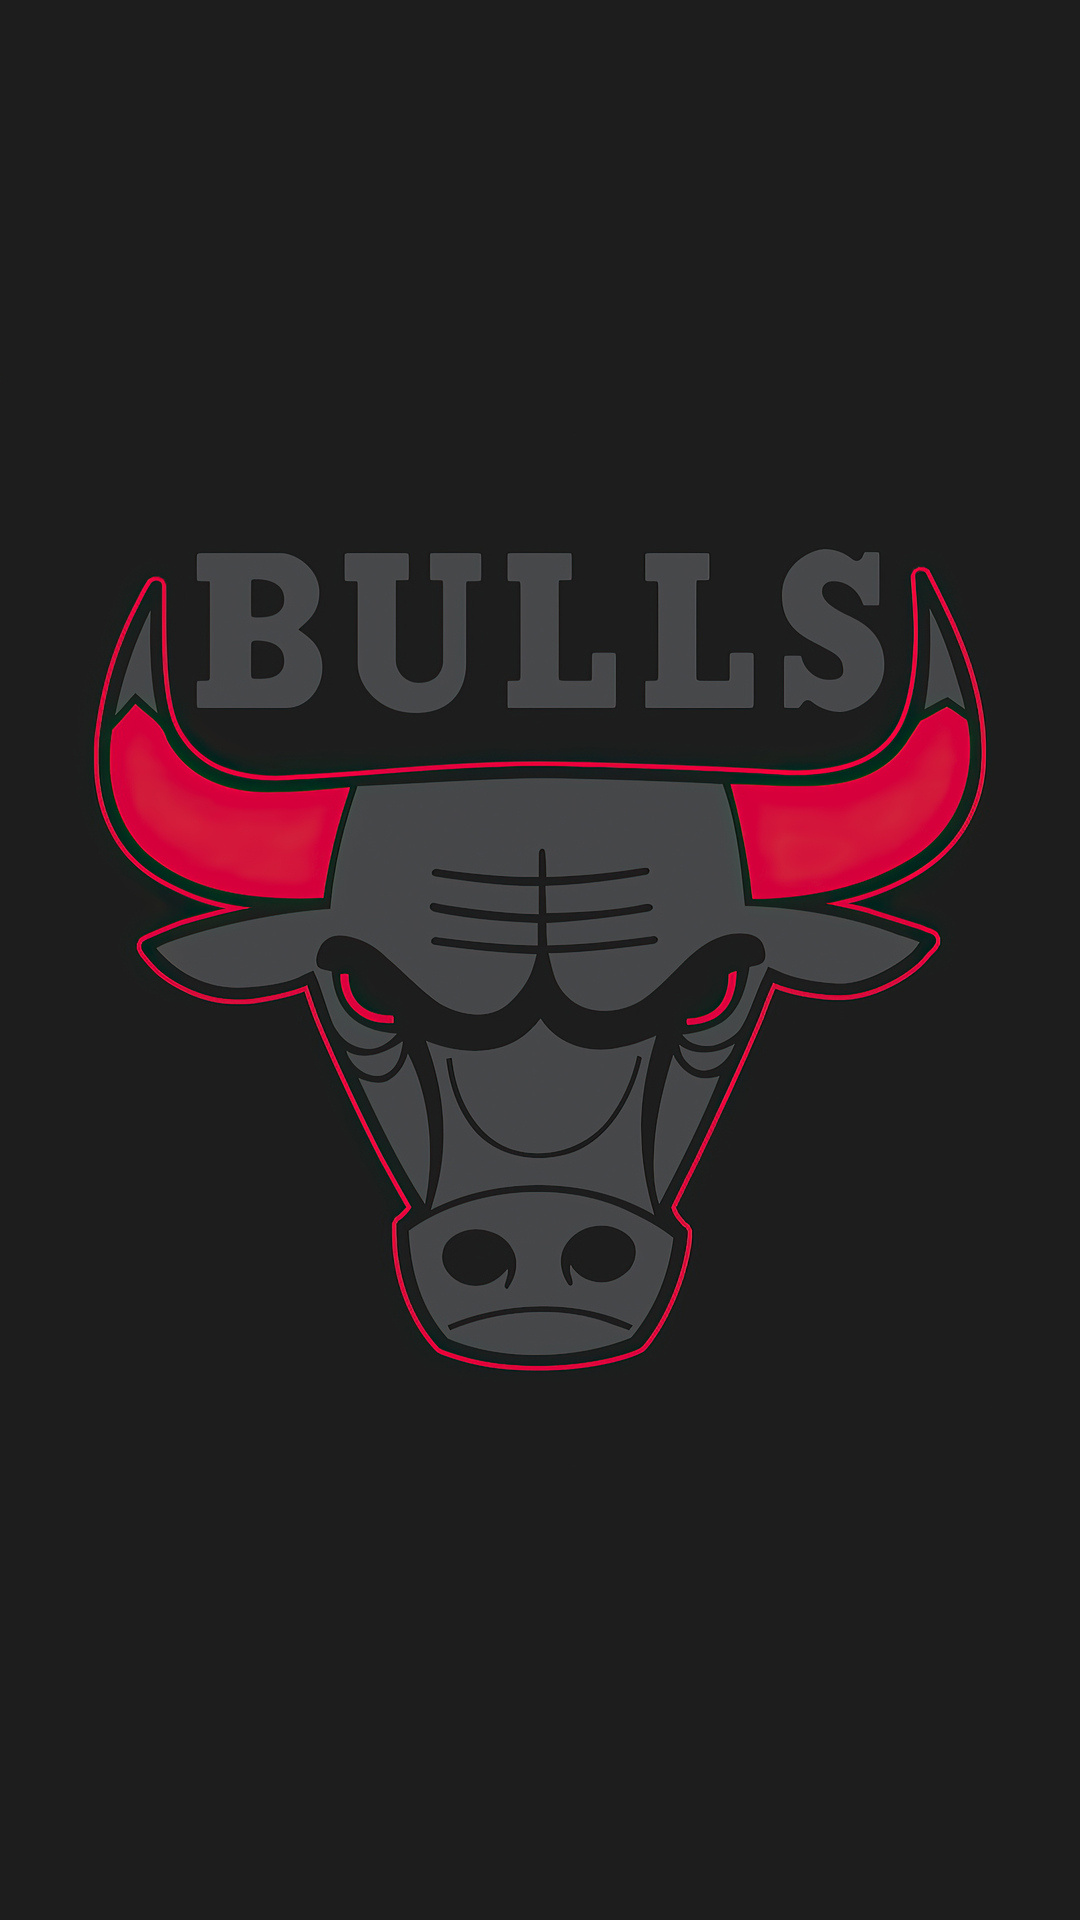 Chicago Bulls: The team won the third consecutive NBA championship by defeating the Atlanta Hawks in 1993. 1080x1920 Full HD Background.